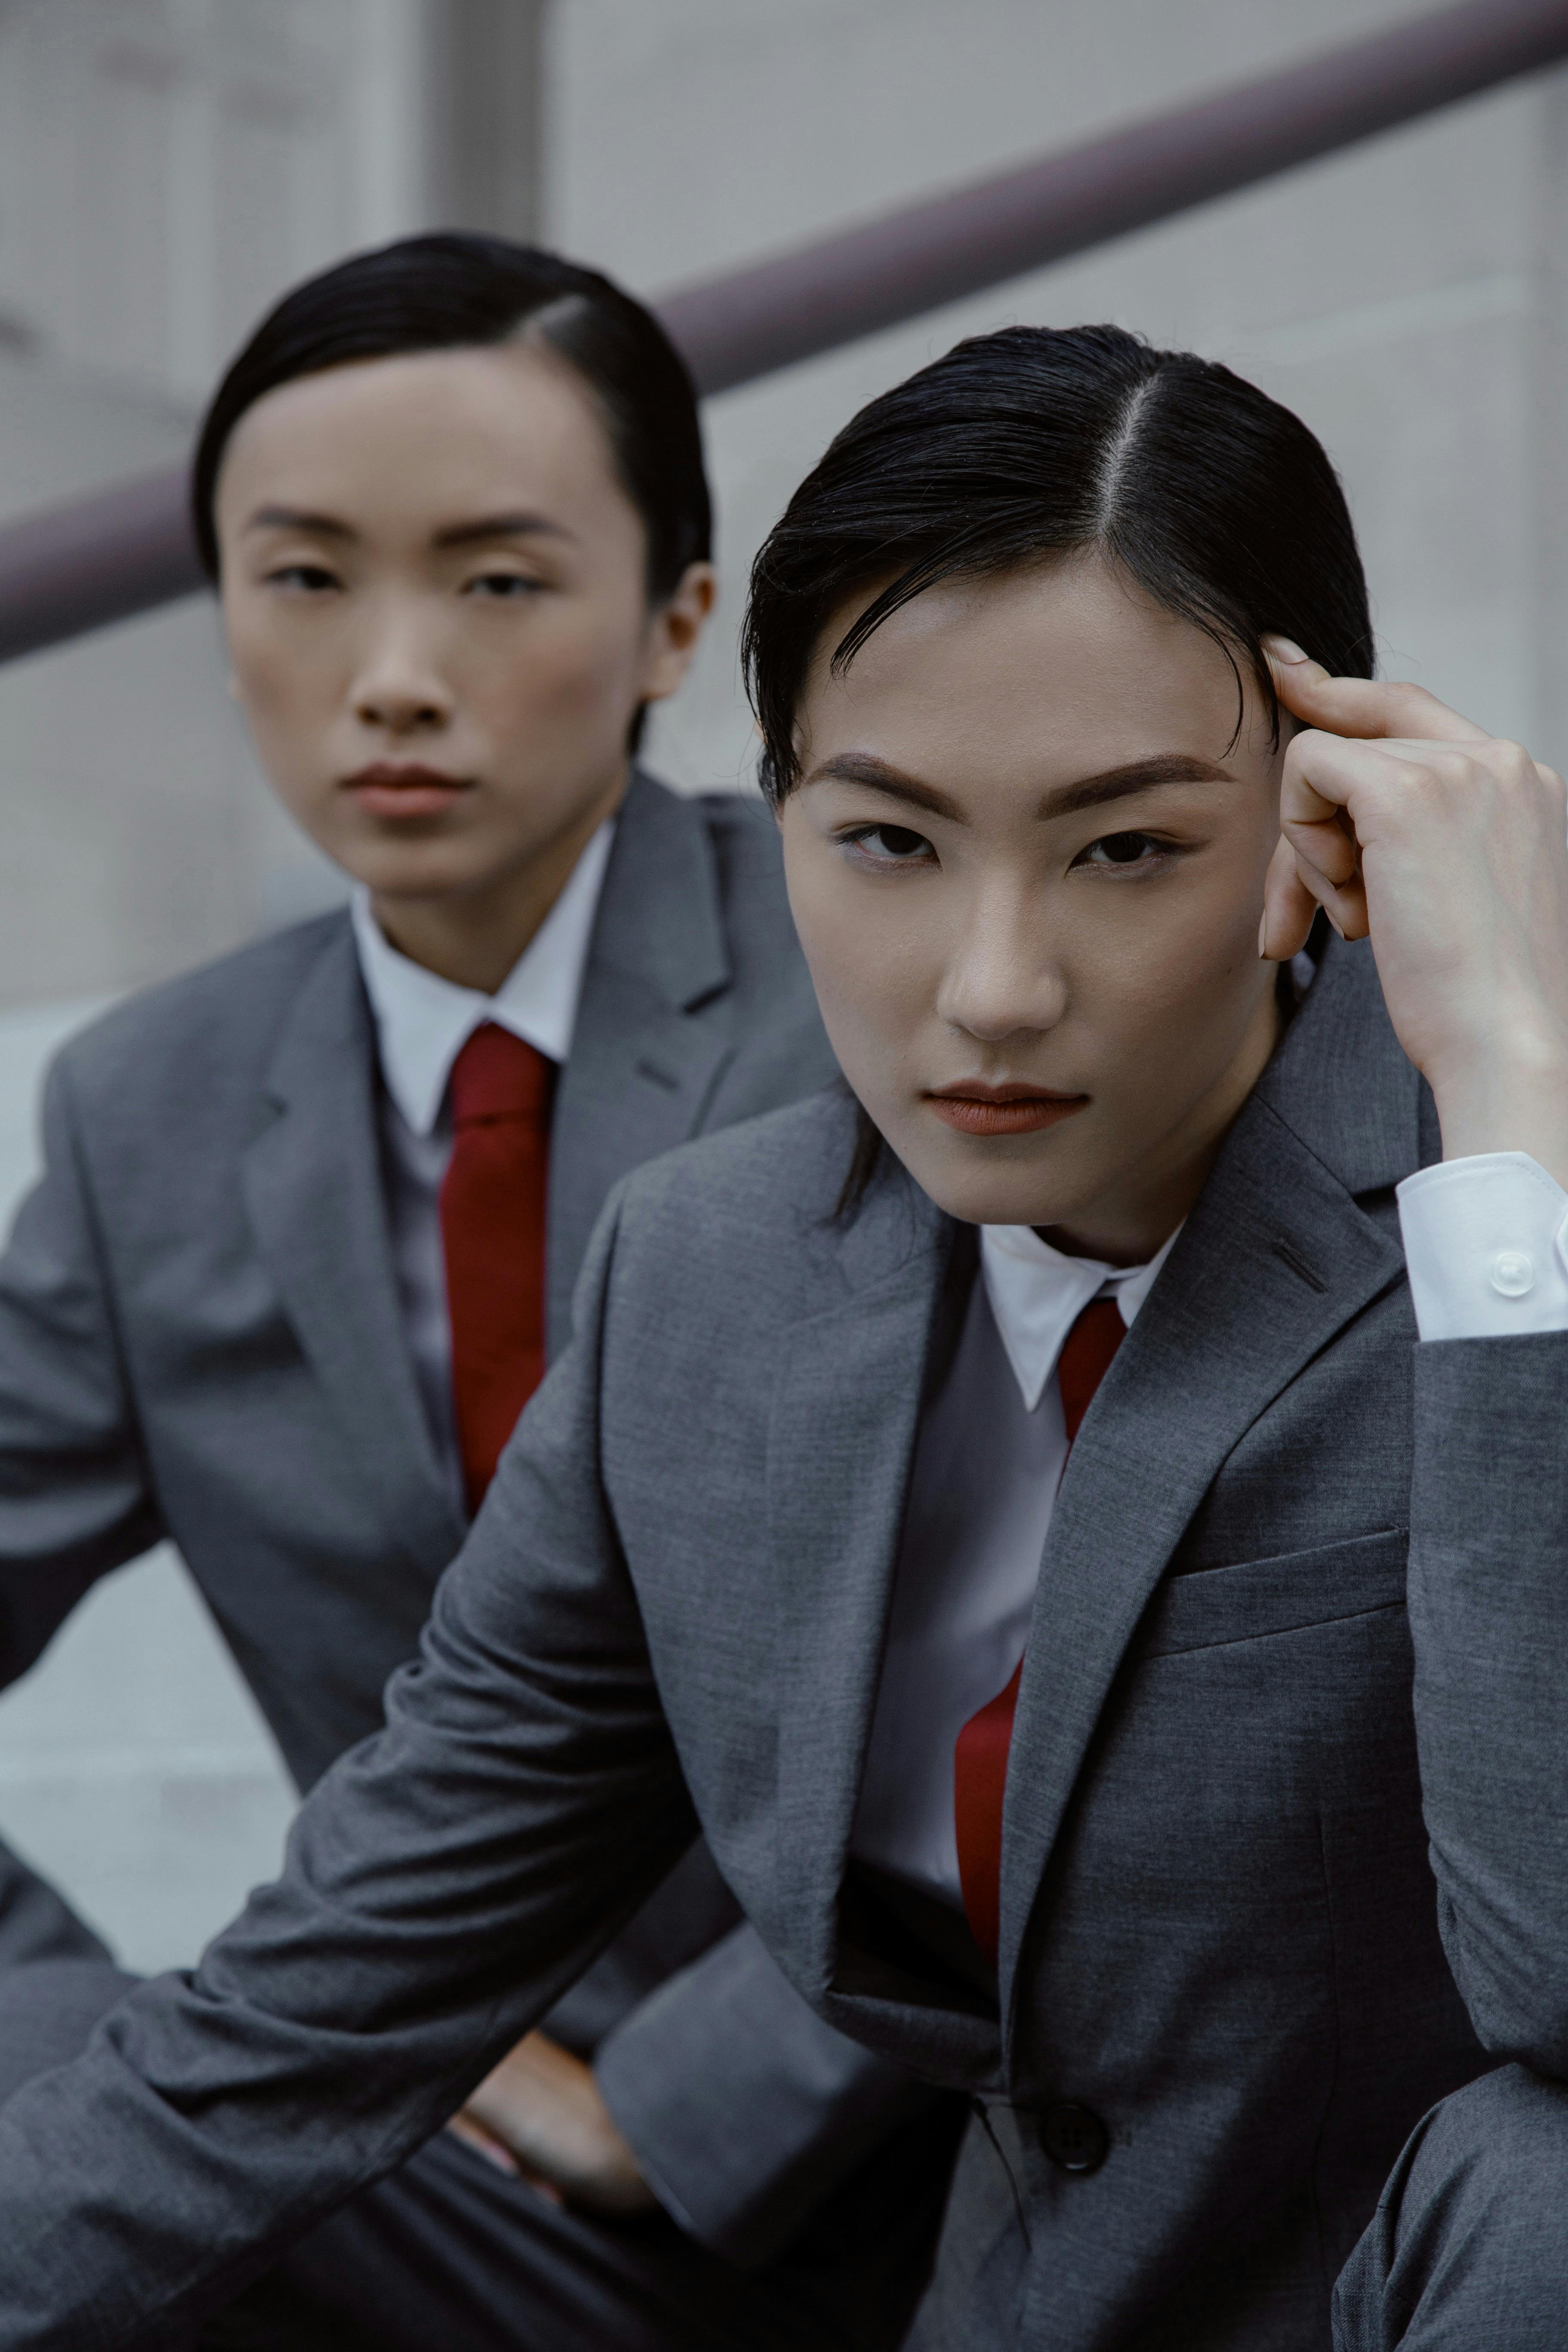 women in gray suits with red ties